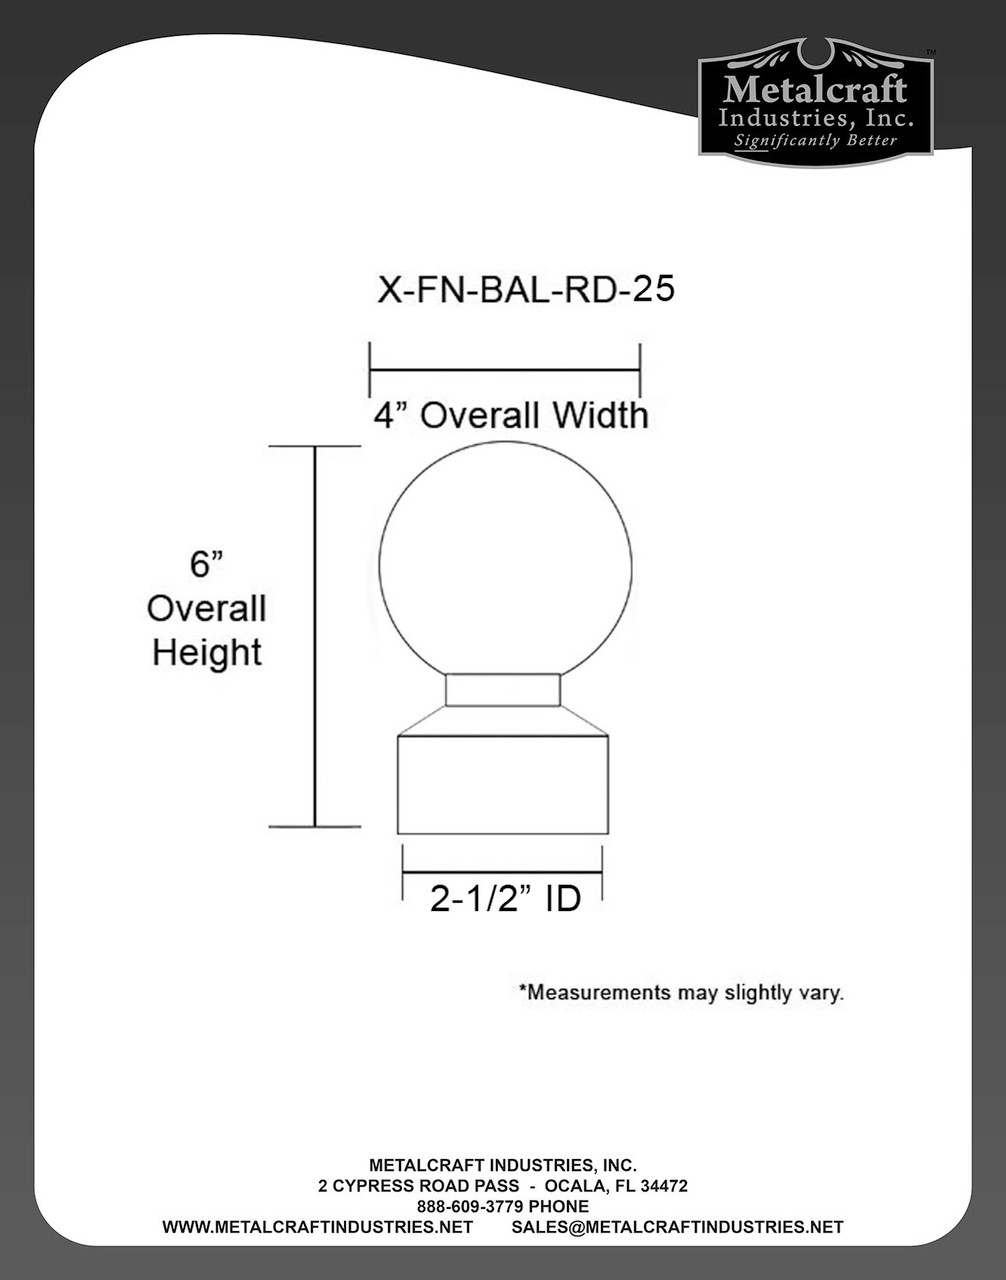 X-FN-BAL-RD-25
SPECIFICATION DRAWING